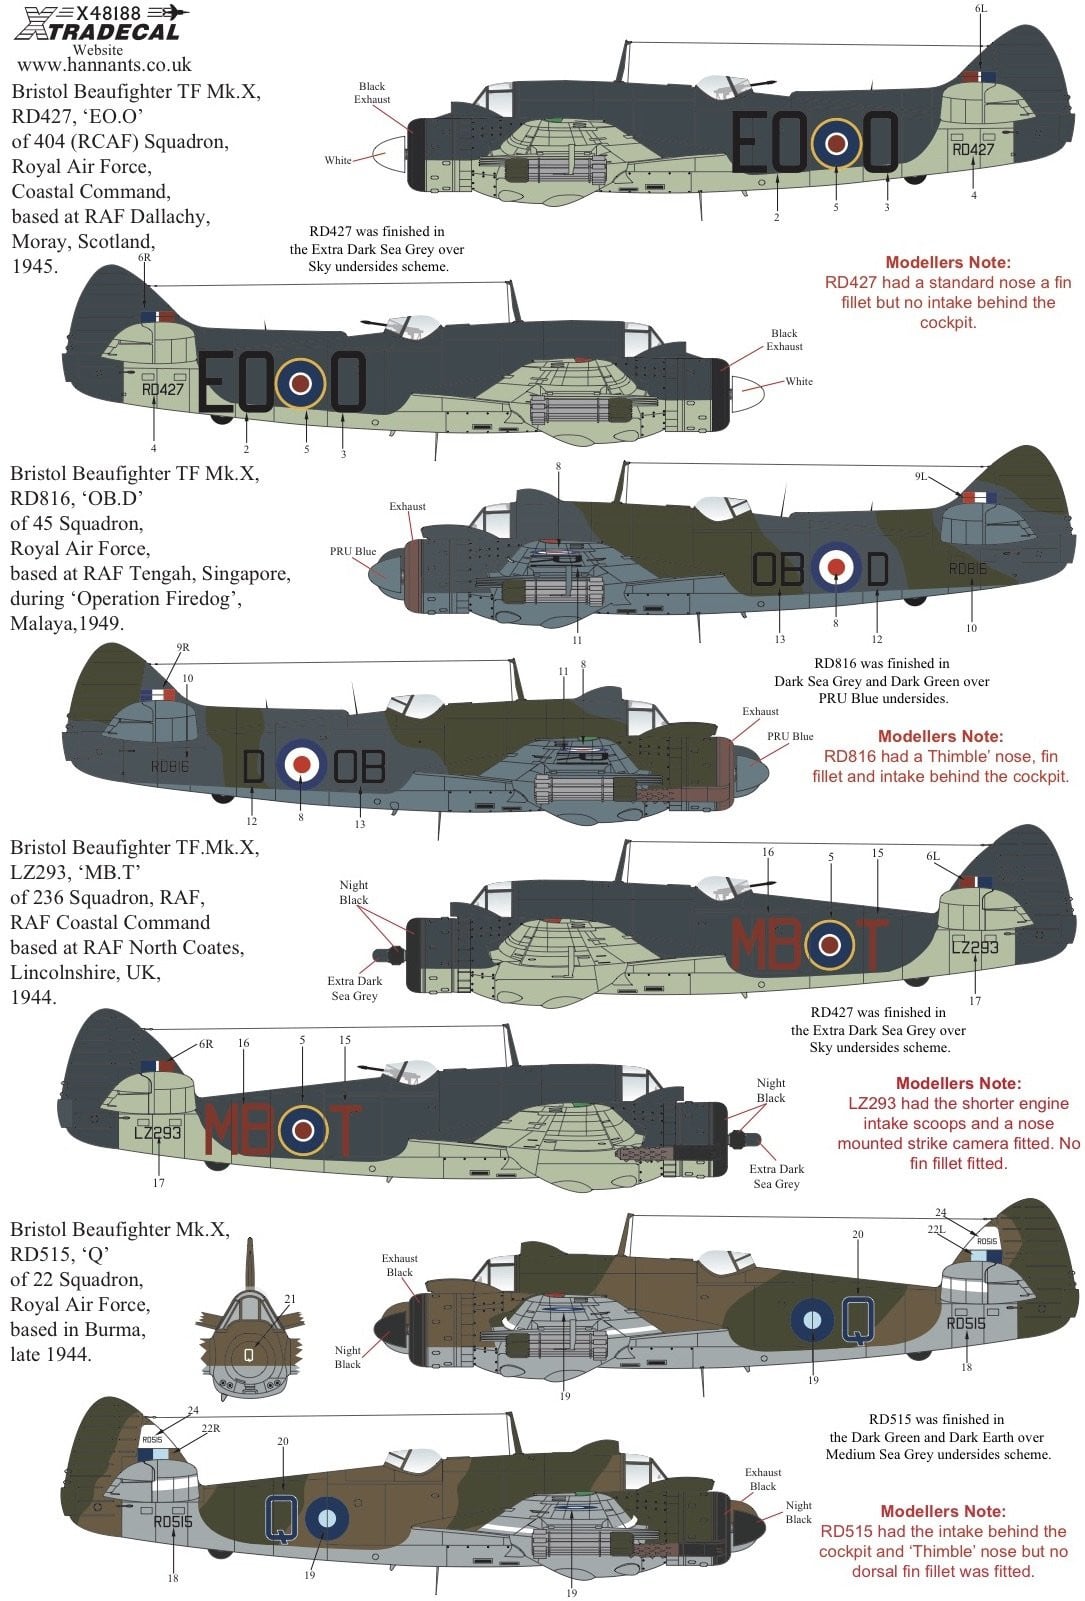 Xtradecal X48188 1/48 Bristol Beaufighter TF. Mk.X Model Decals - SGS Model Store